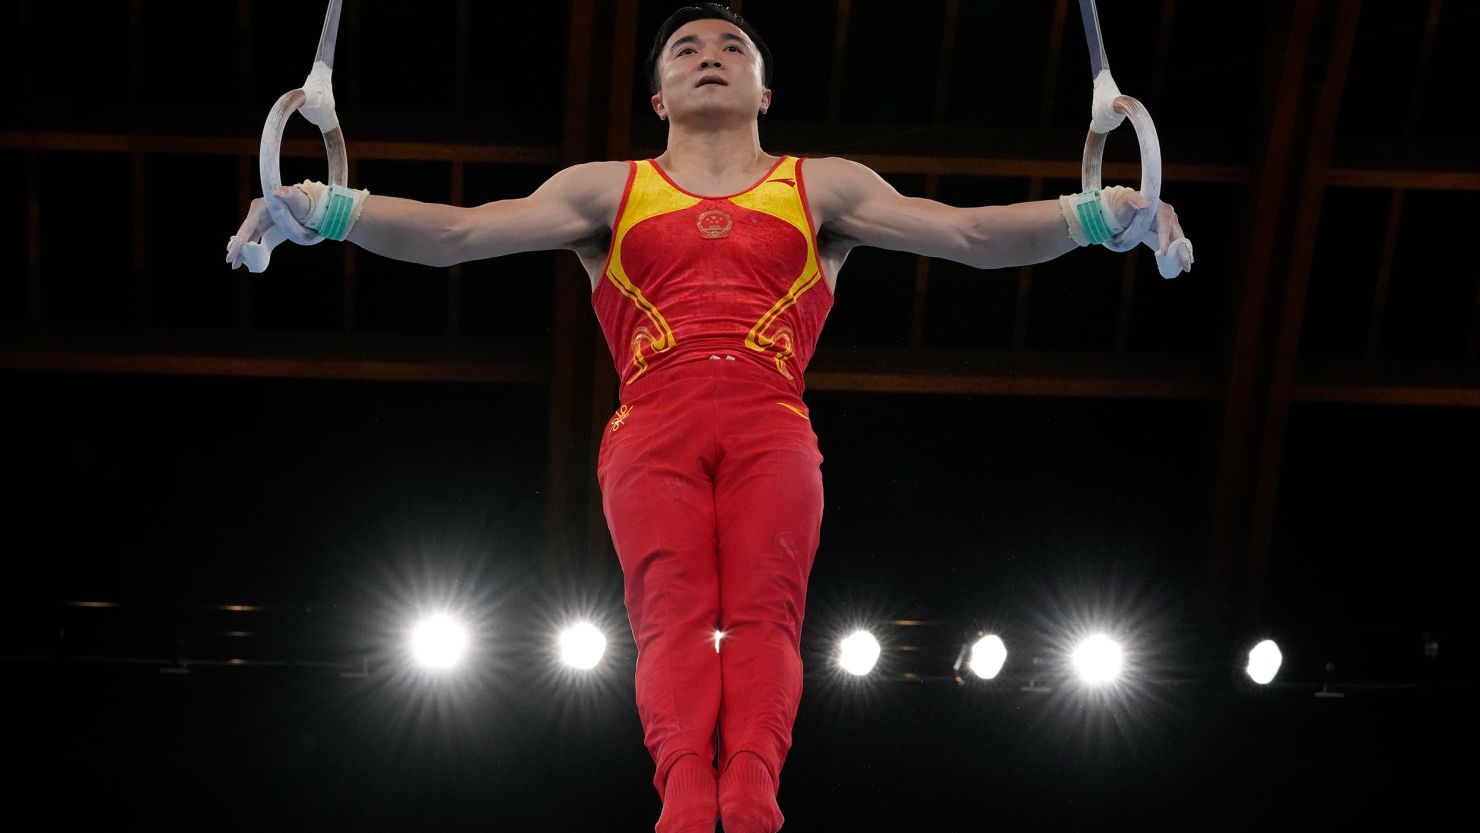 Liu Yang, of China, performs on the rings during the artistic gymnastics men's apparatus final at the 2020 Summer Olympics, Monday, Aug. 2, 2021, in Tokyo, Japan.